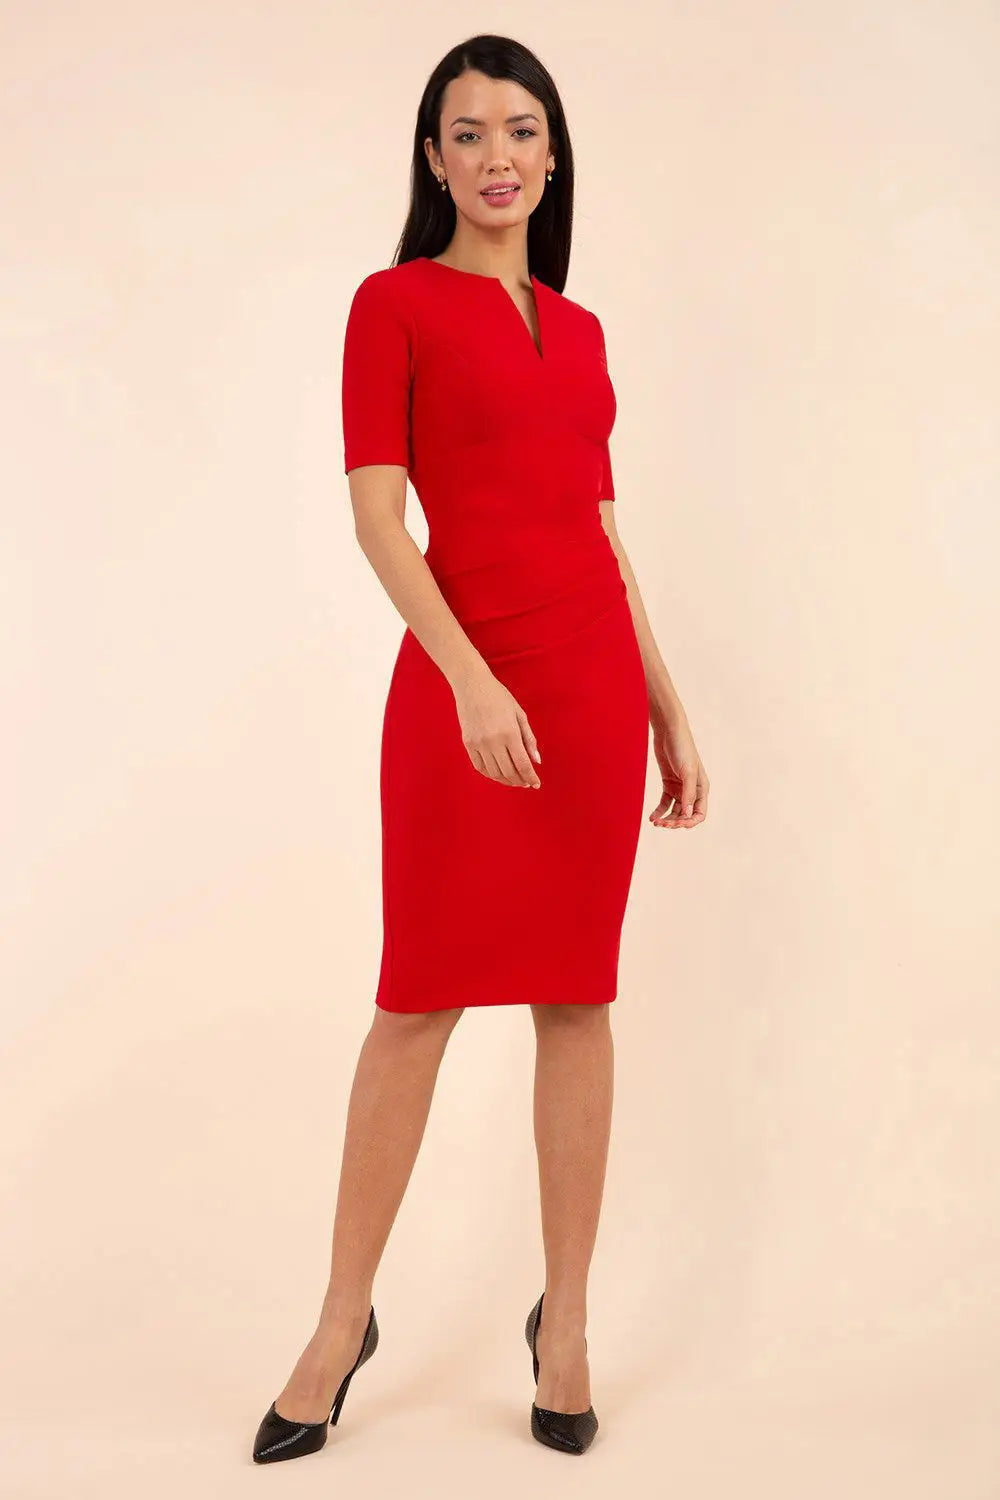 Women' Business Sadie Dress - True Red NORA GARDNER | OFFICIAL STORE for work and office